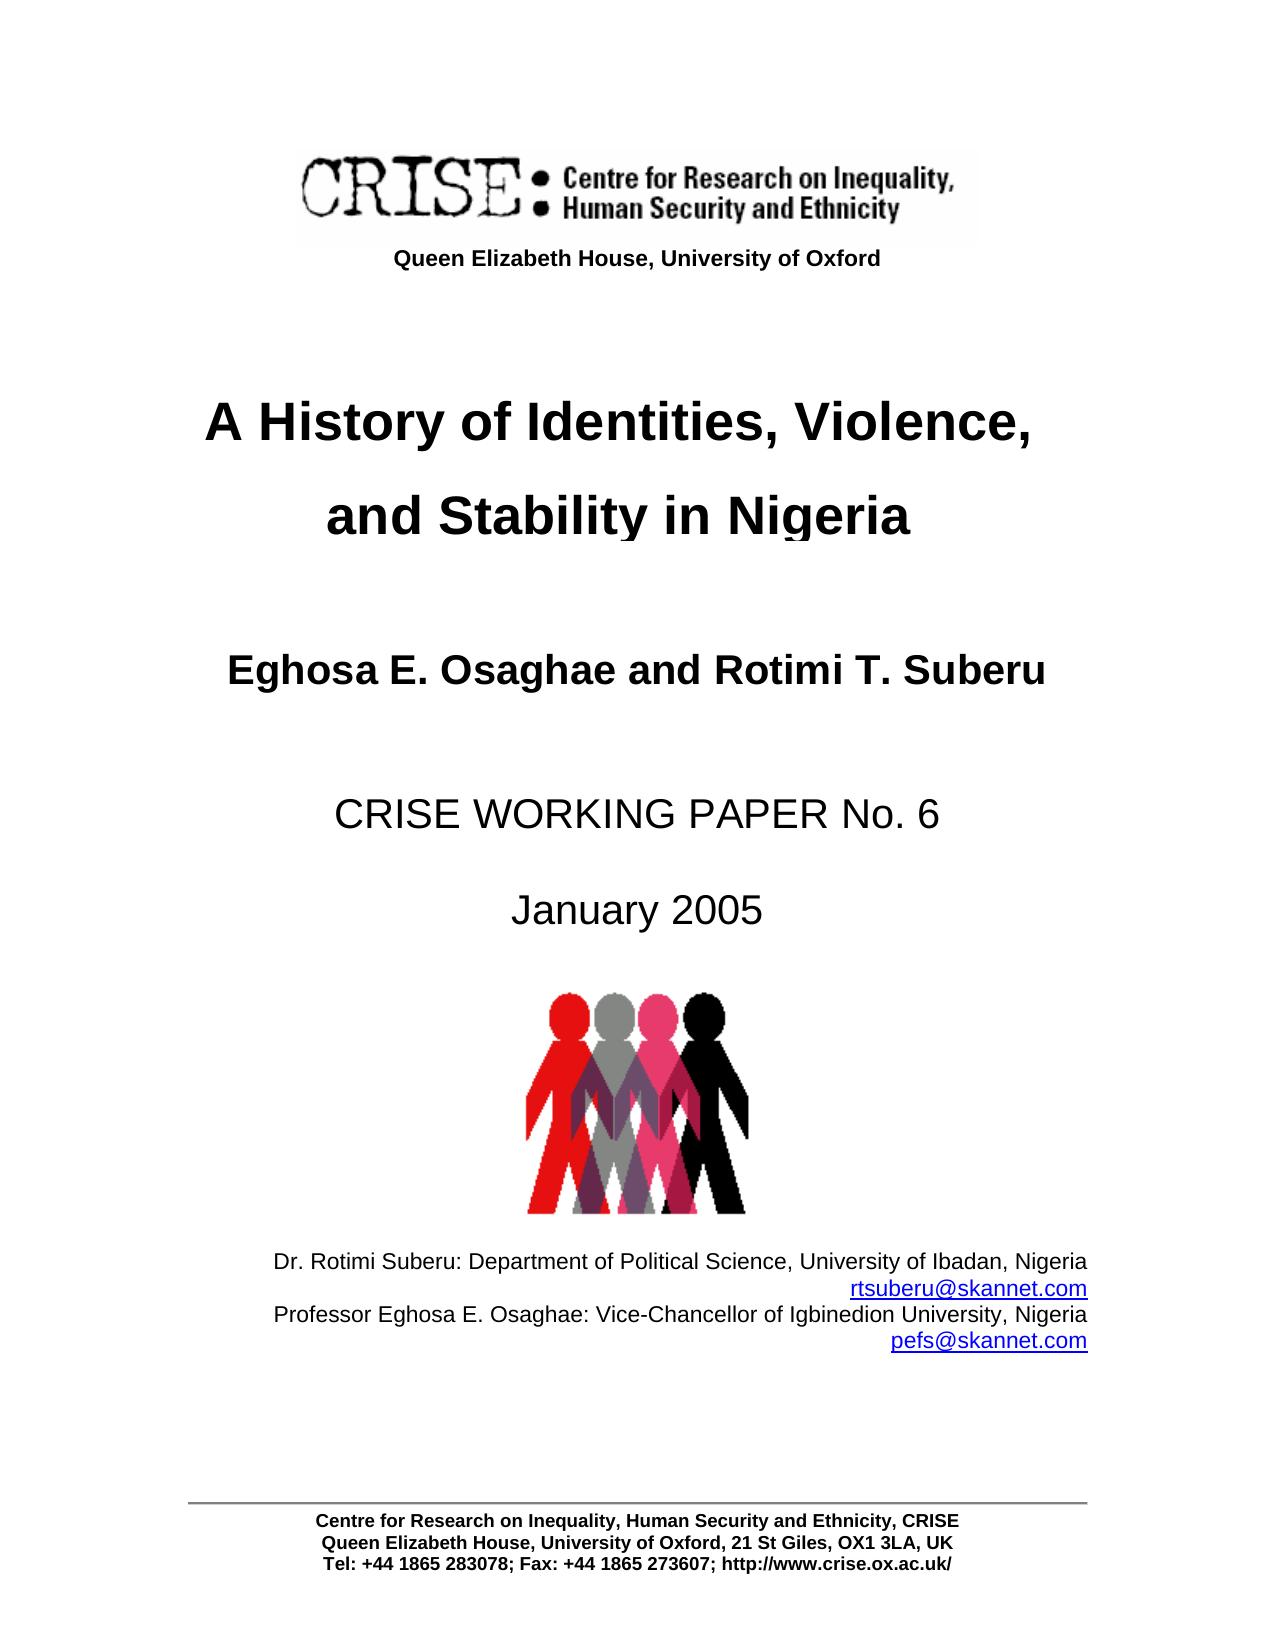 THE HISTORY OF IDENTITIES AND VIOLENT CONFLICTS IN NIGERIA